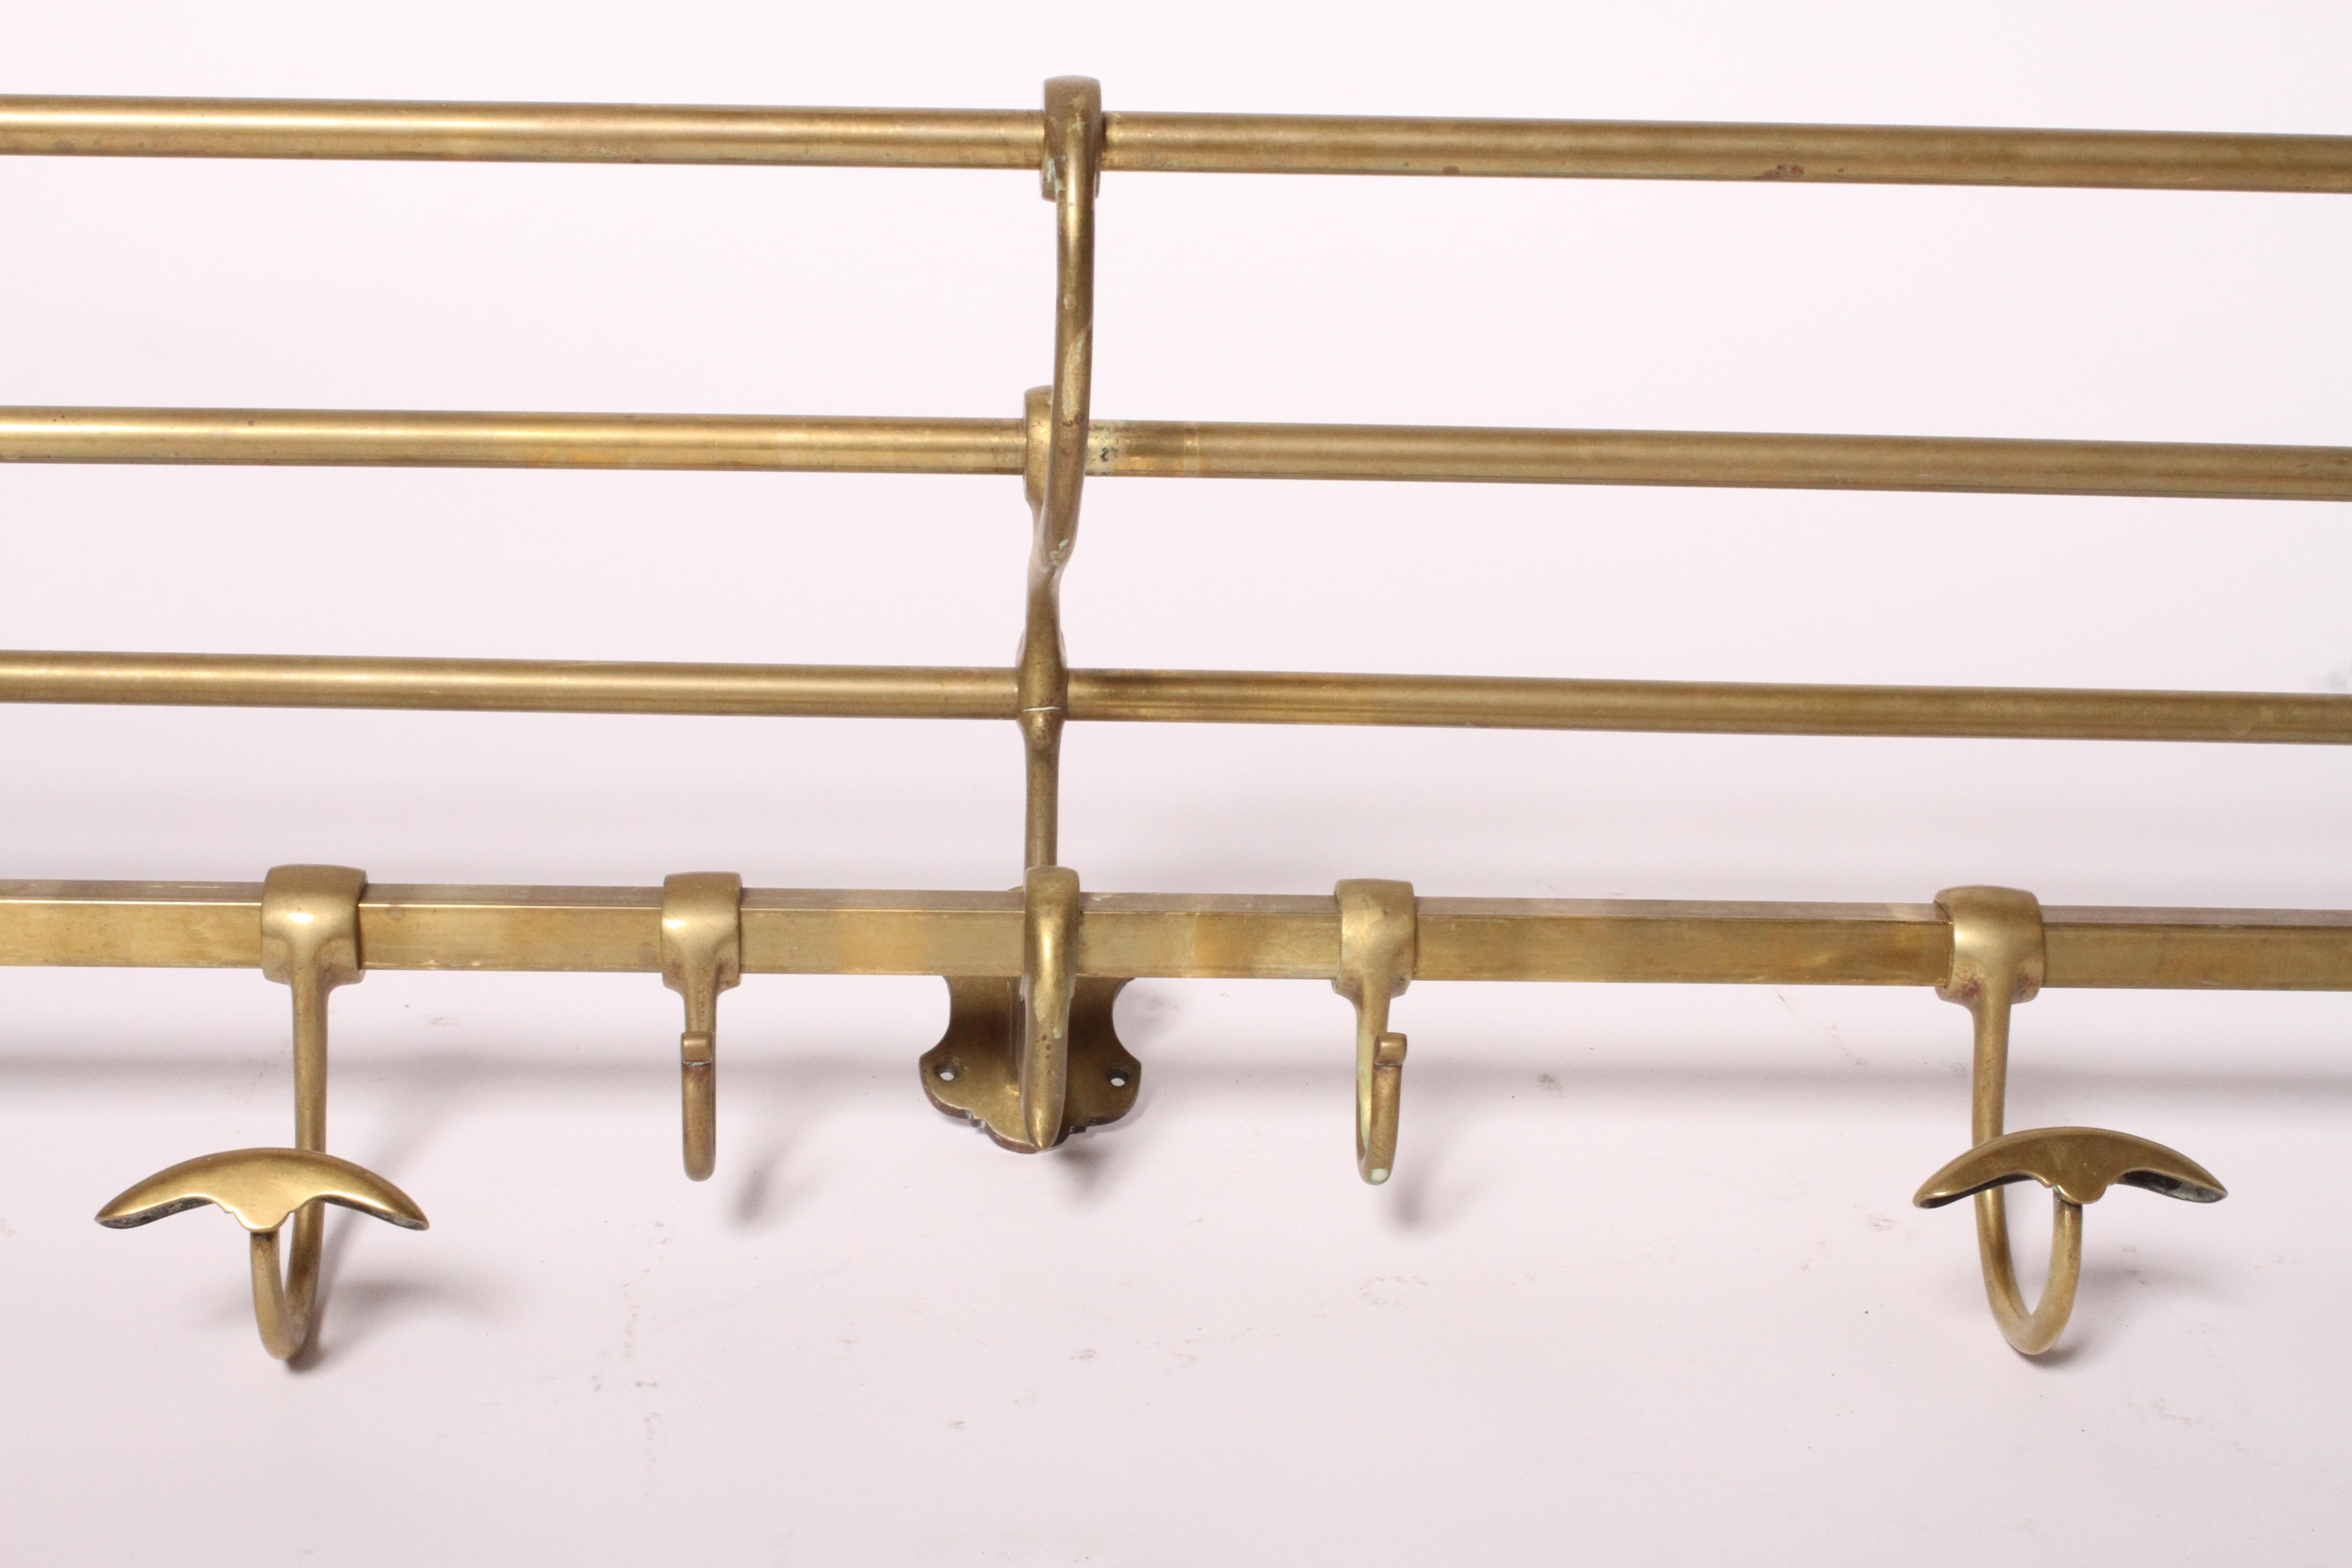 Early 20th Century 1900s Vintage Brass Wall Mounted Train Luggage and Coat Rack